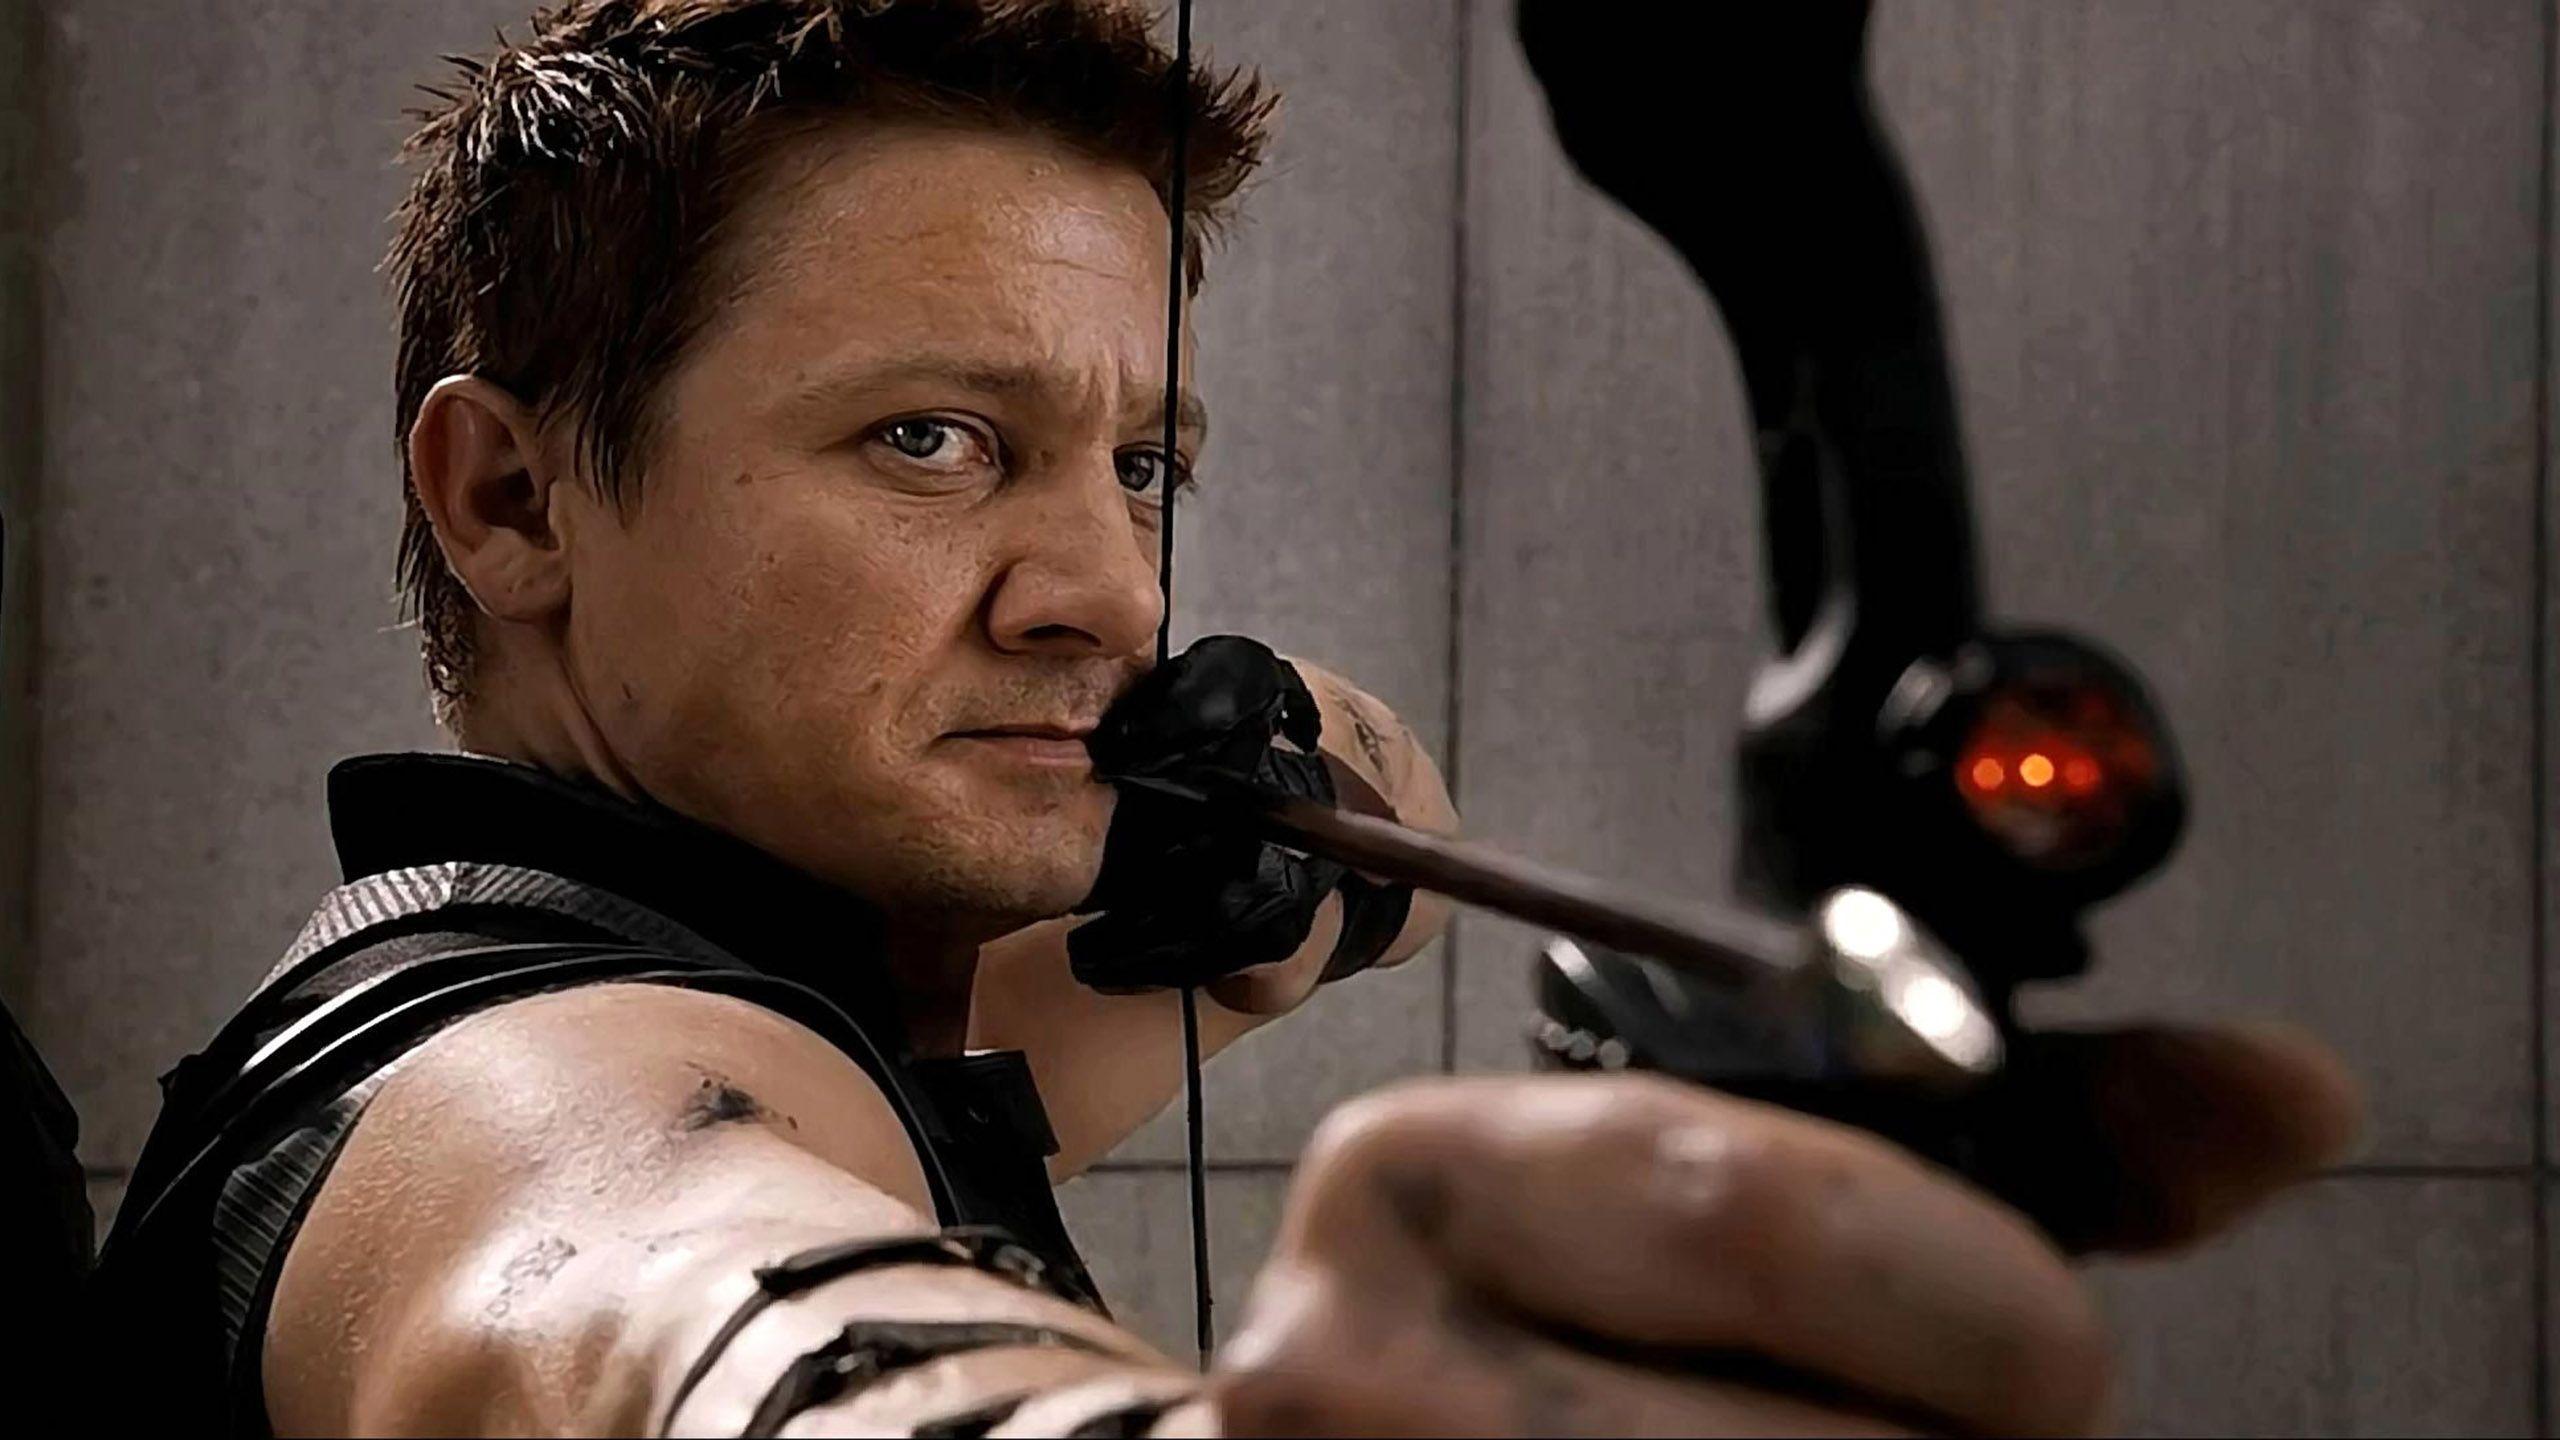 Jeremy Renner. Free Desktop Wallpaper for Widescreen, HD and Mobile